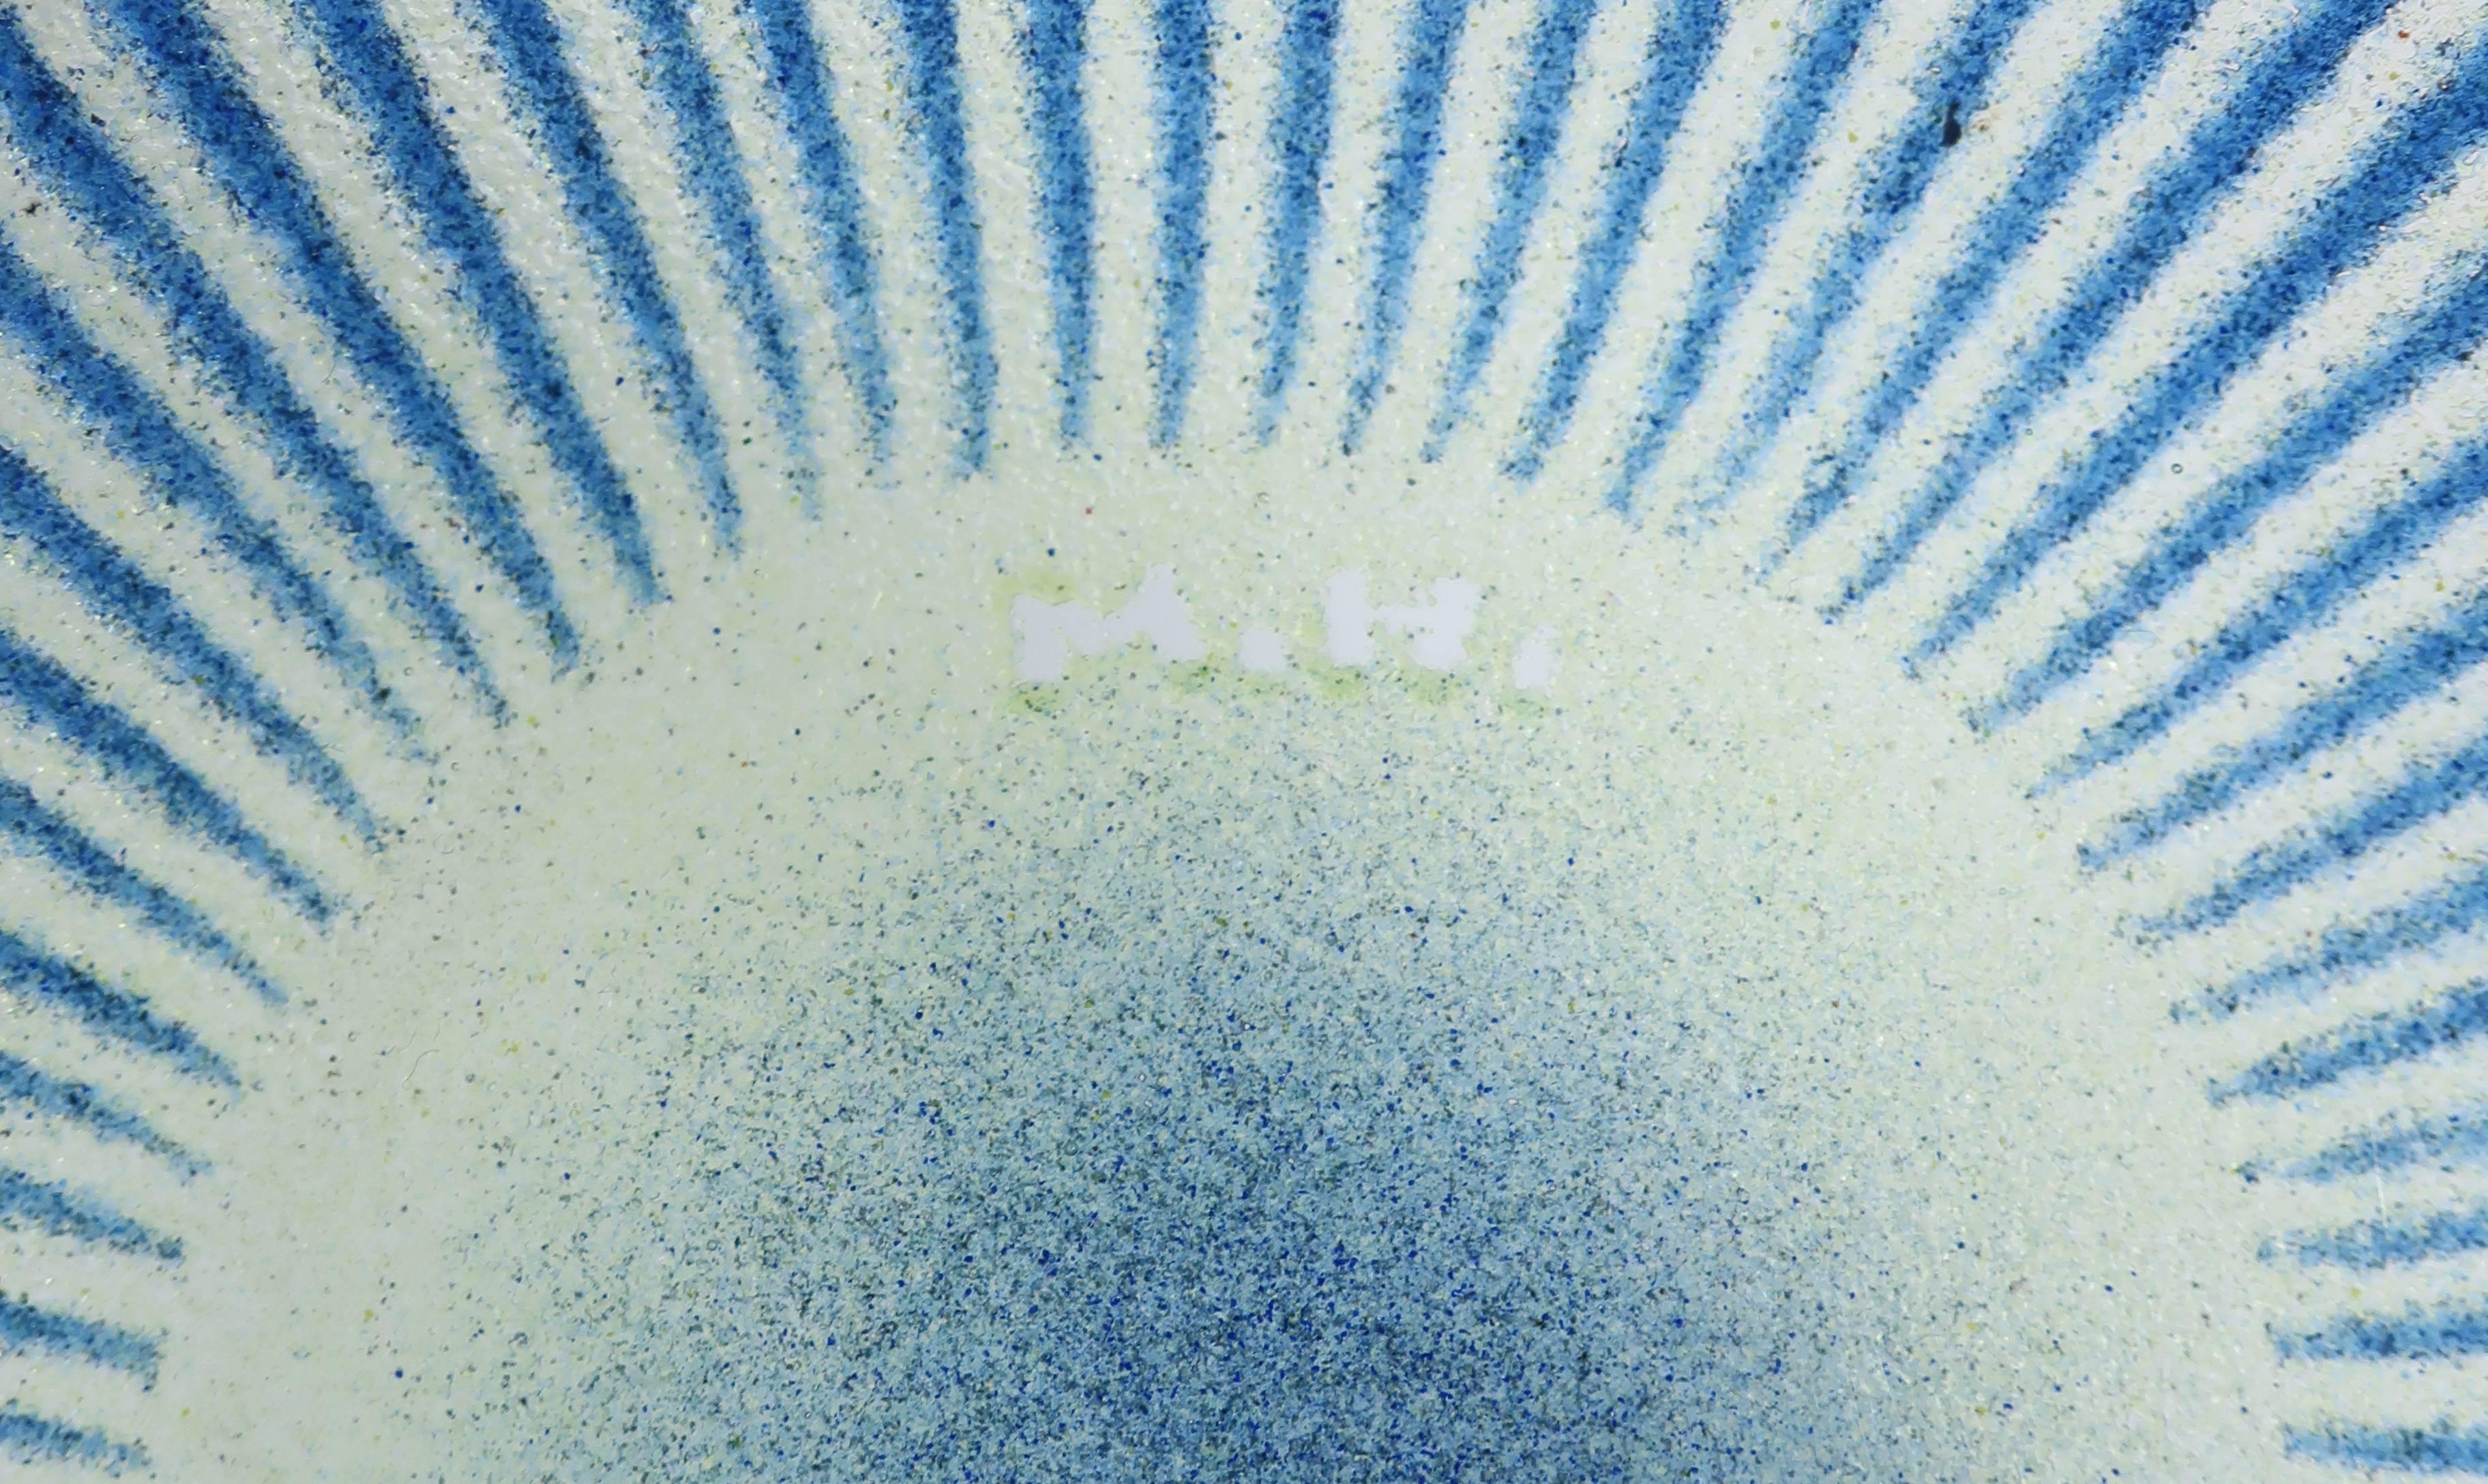 With an ovoid shape, this midcentury art glass bowl has a lovely pattern of blue lines radiating out from the yellow green centre. Signed by the artist with his trademark “M.H.” but undated, this bowl is in fantastic shape, with no chips, cracks, or